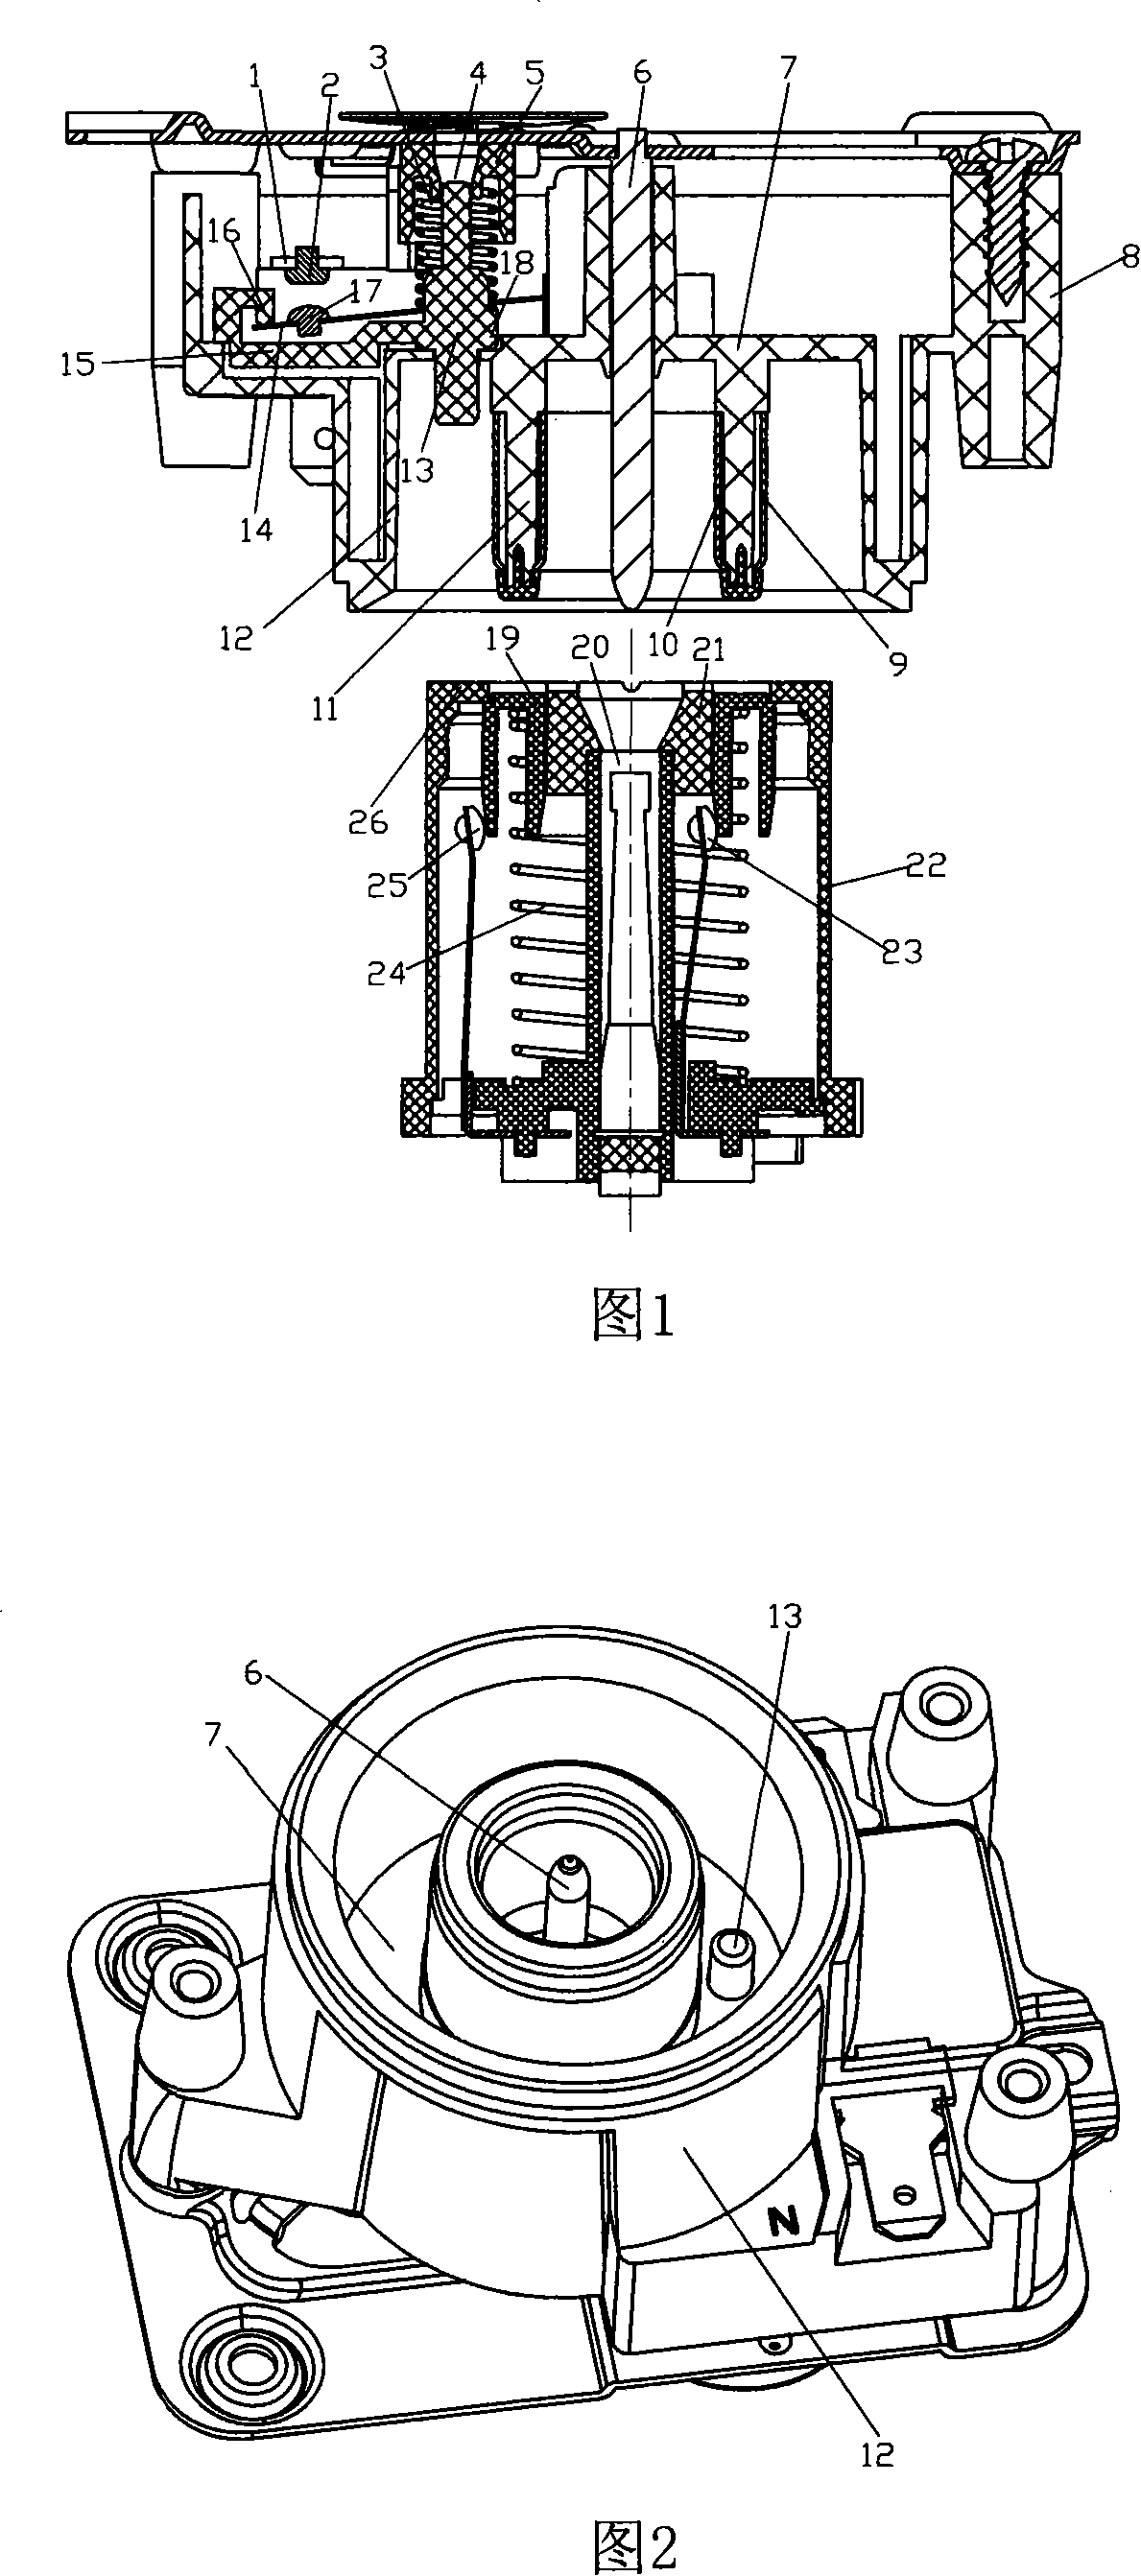 Wireless electric connection device